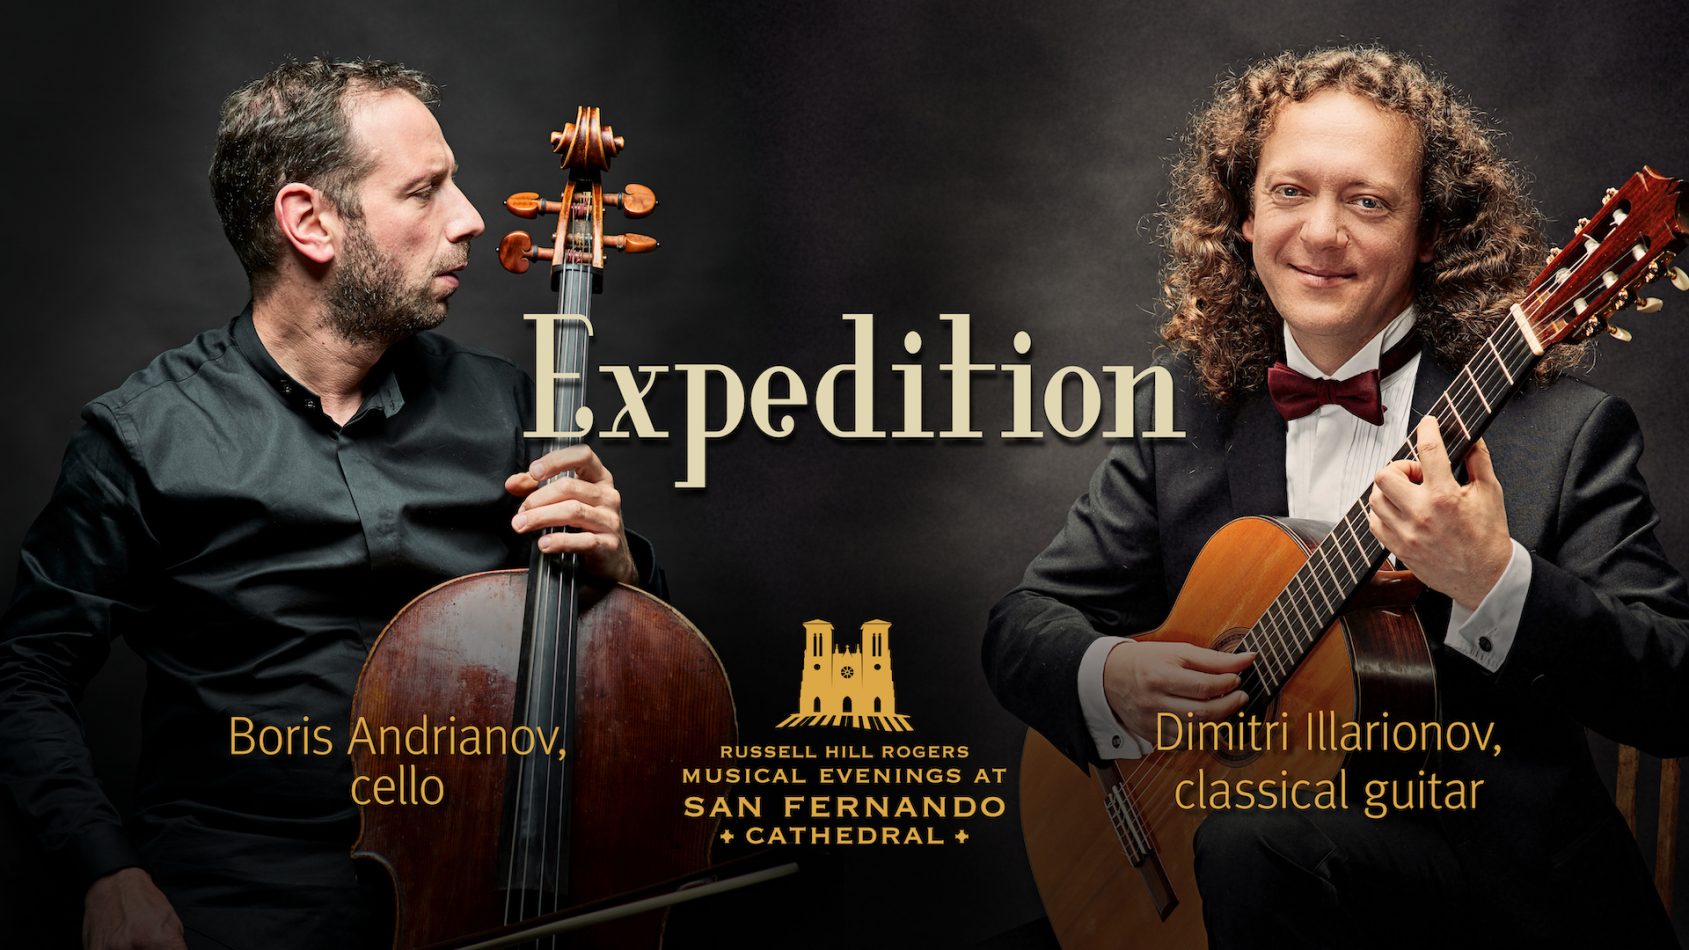 Gallery 1 - Expedition | Russell Hill Rogers Musical Evenings at San Fernando Cathedral